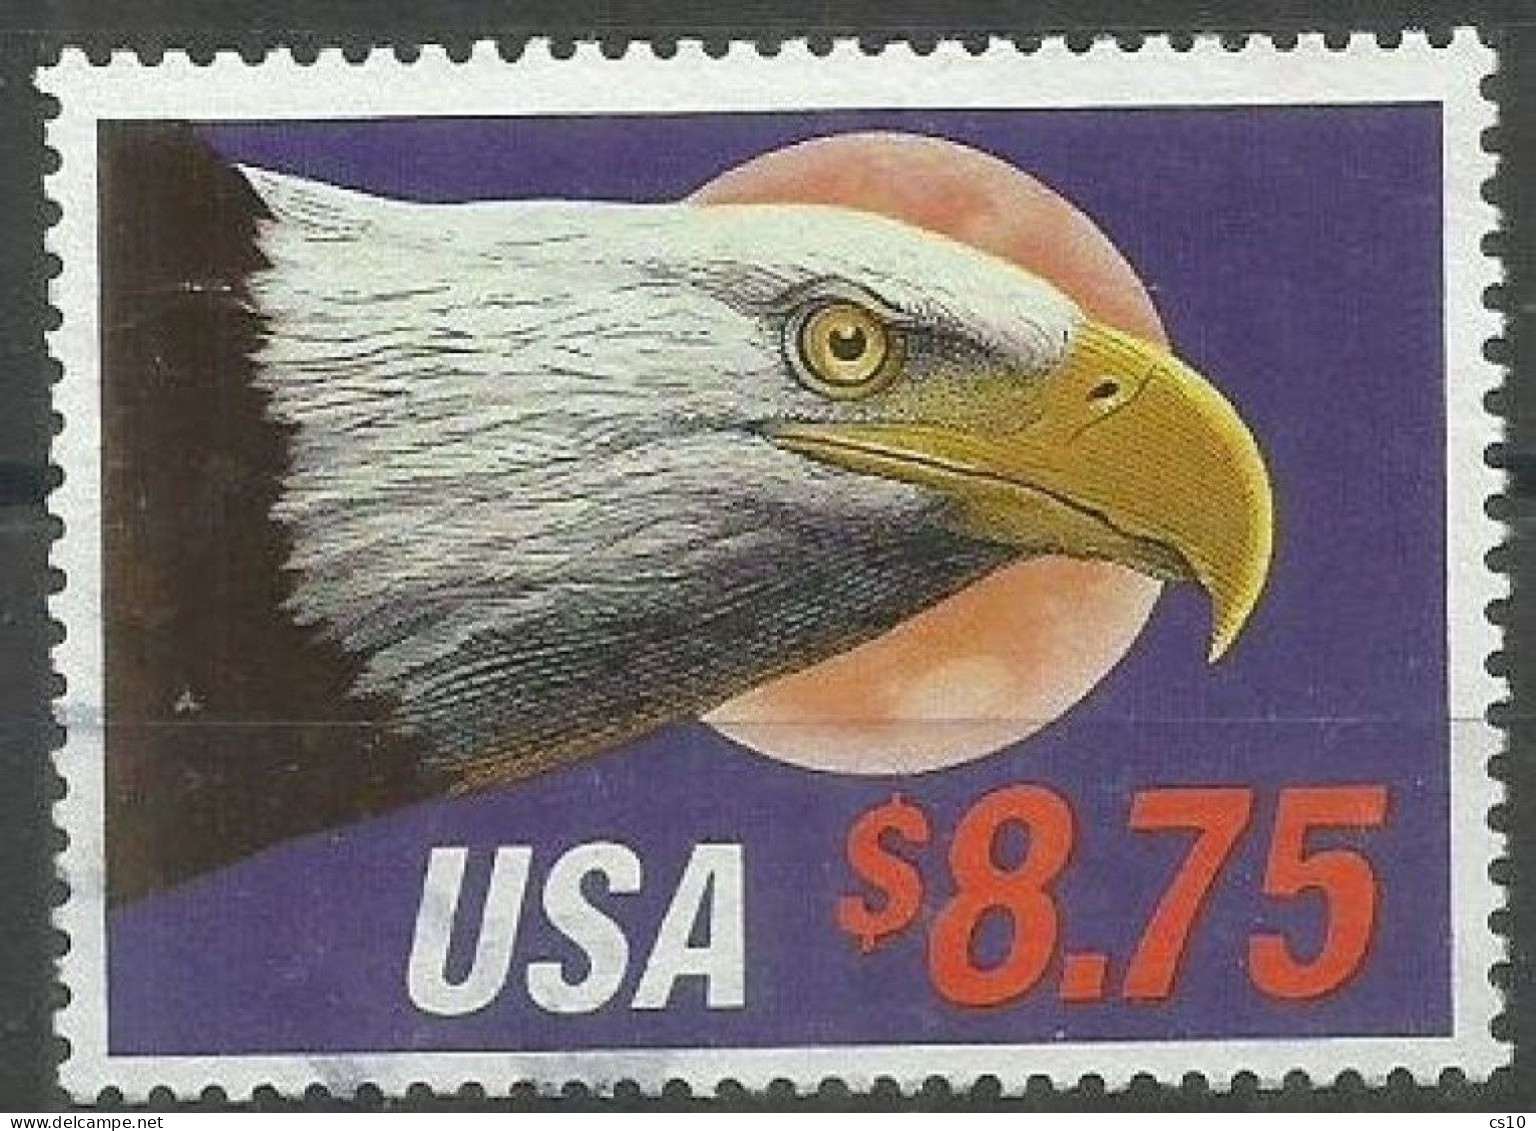 USA Express Mail 1988 Eagle & Moon High Value 8.75$ SC.# 2394 In VFU Condition - Collections